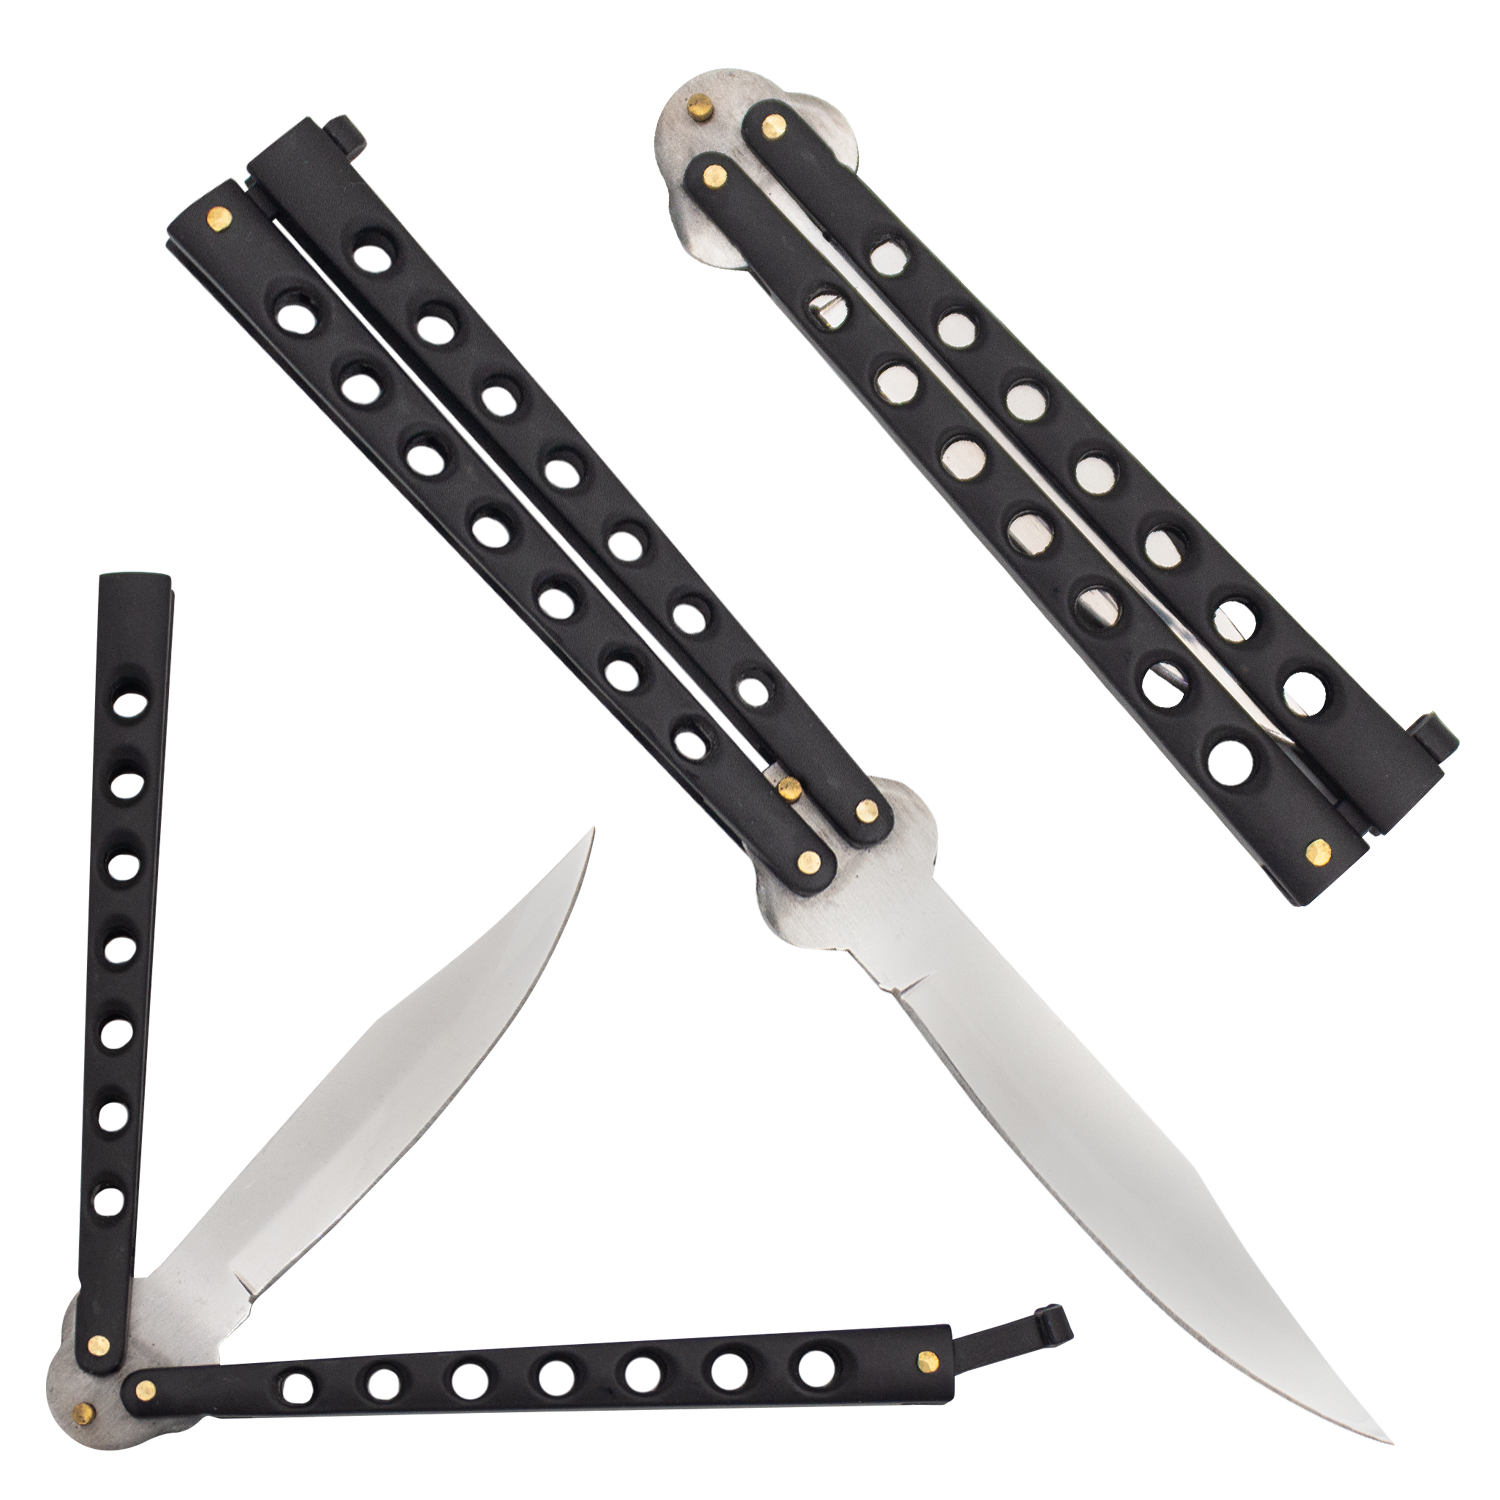 Why Are Butterfly Knives Illegal In The Us